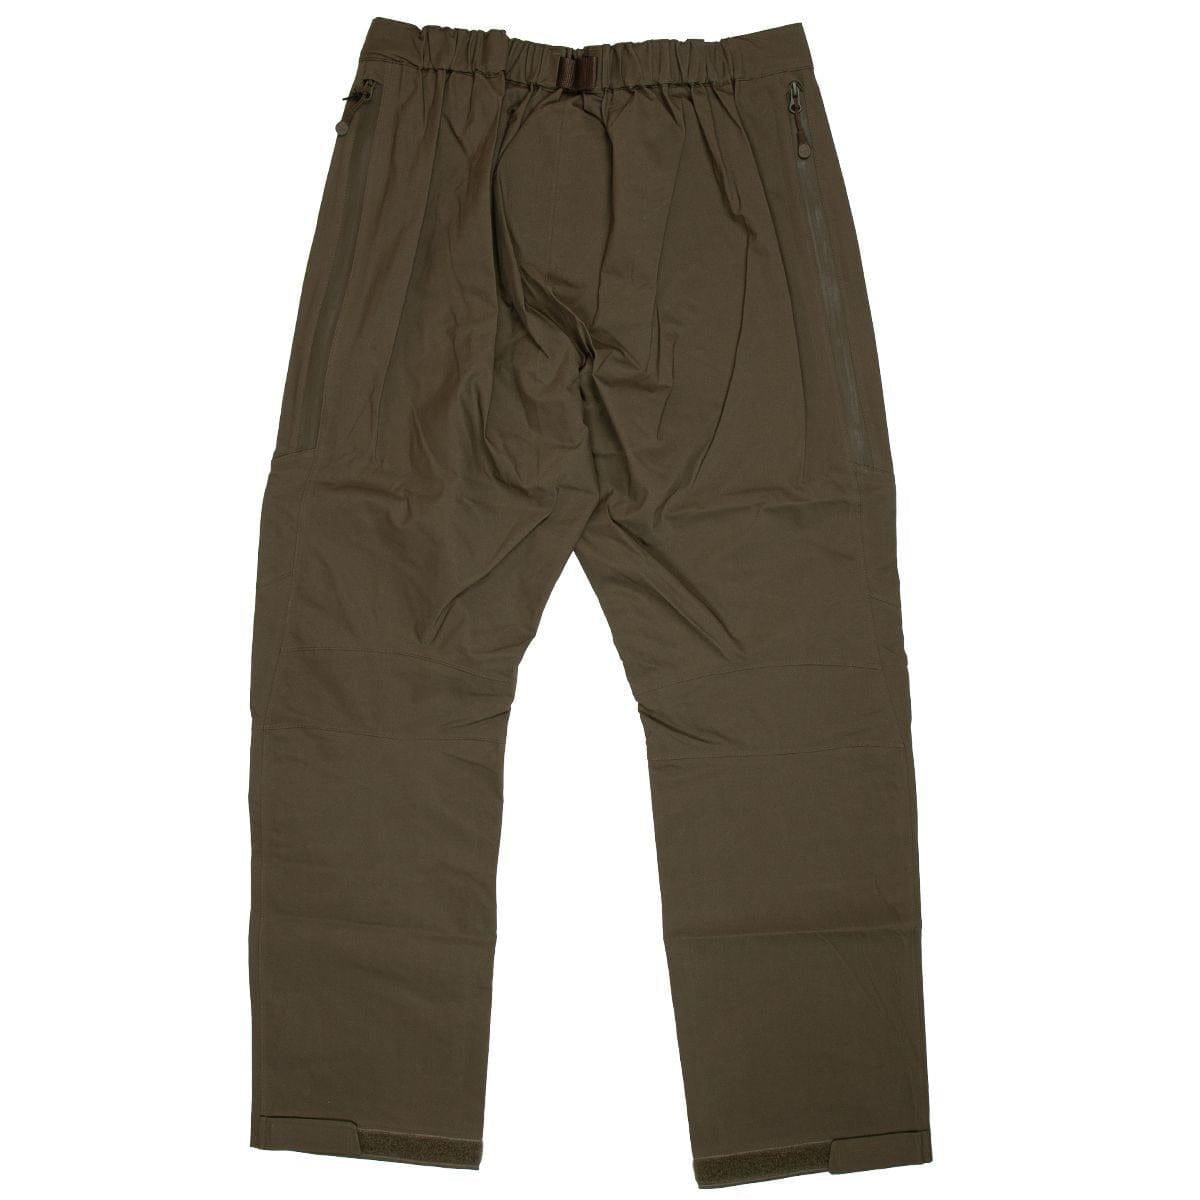 Korda KORE DRYKORE Over Trousers Olive